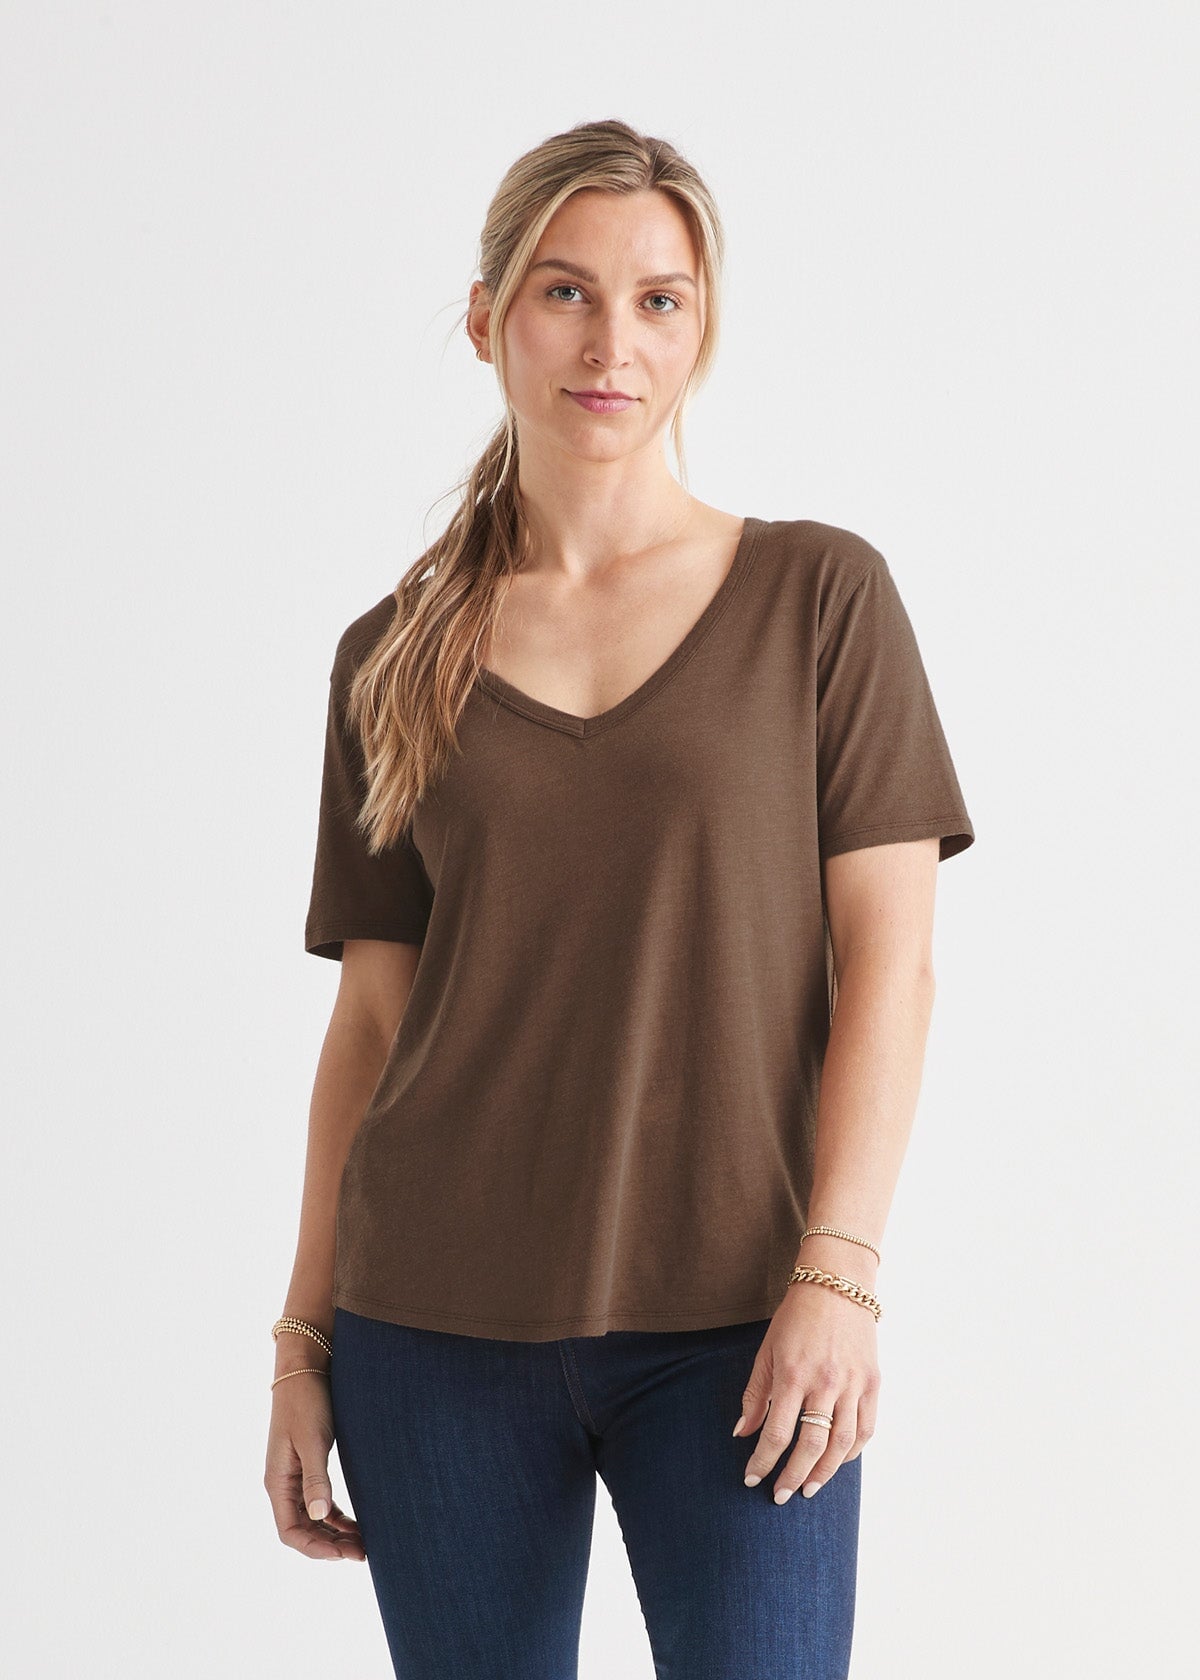 Women's Deep V-Neck T-Shirt - A comfortable t-shirt with a flattering fit  and deep v-shaped neckline